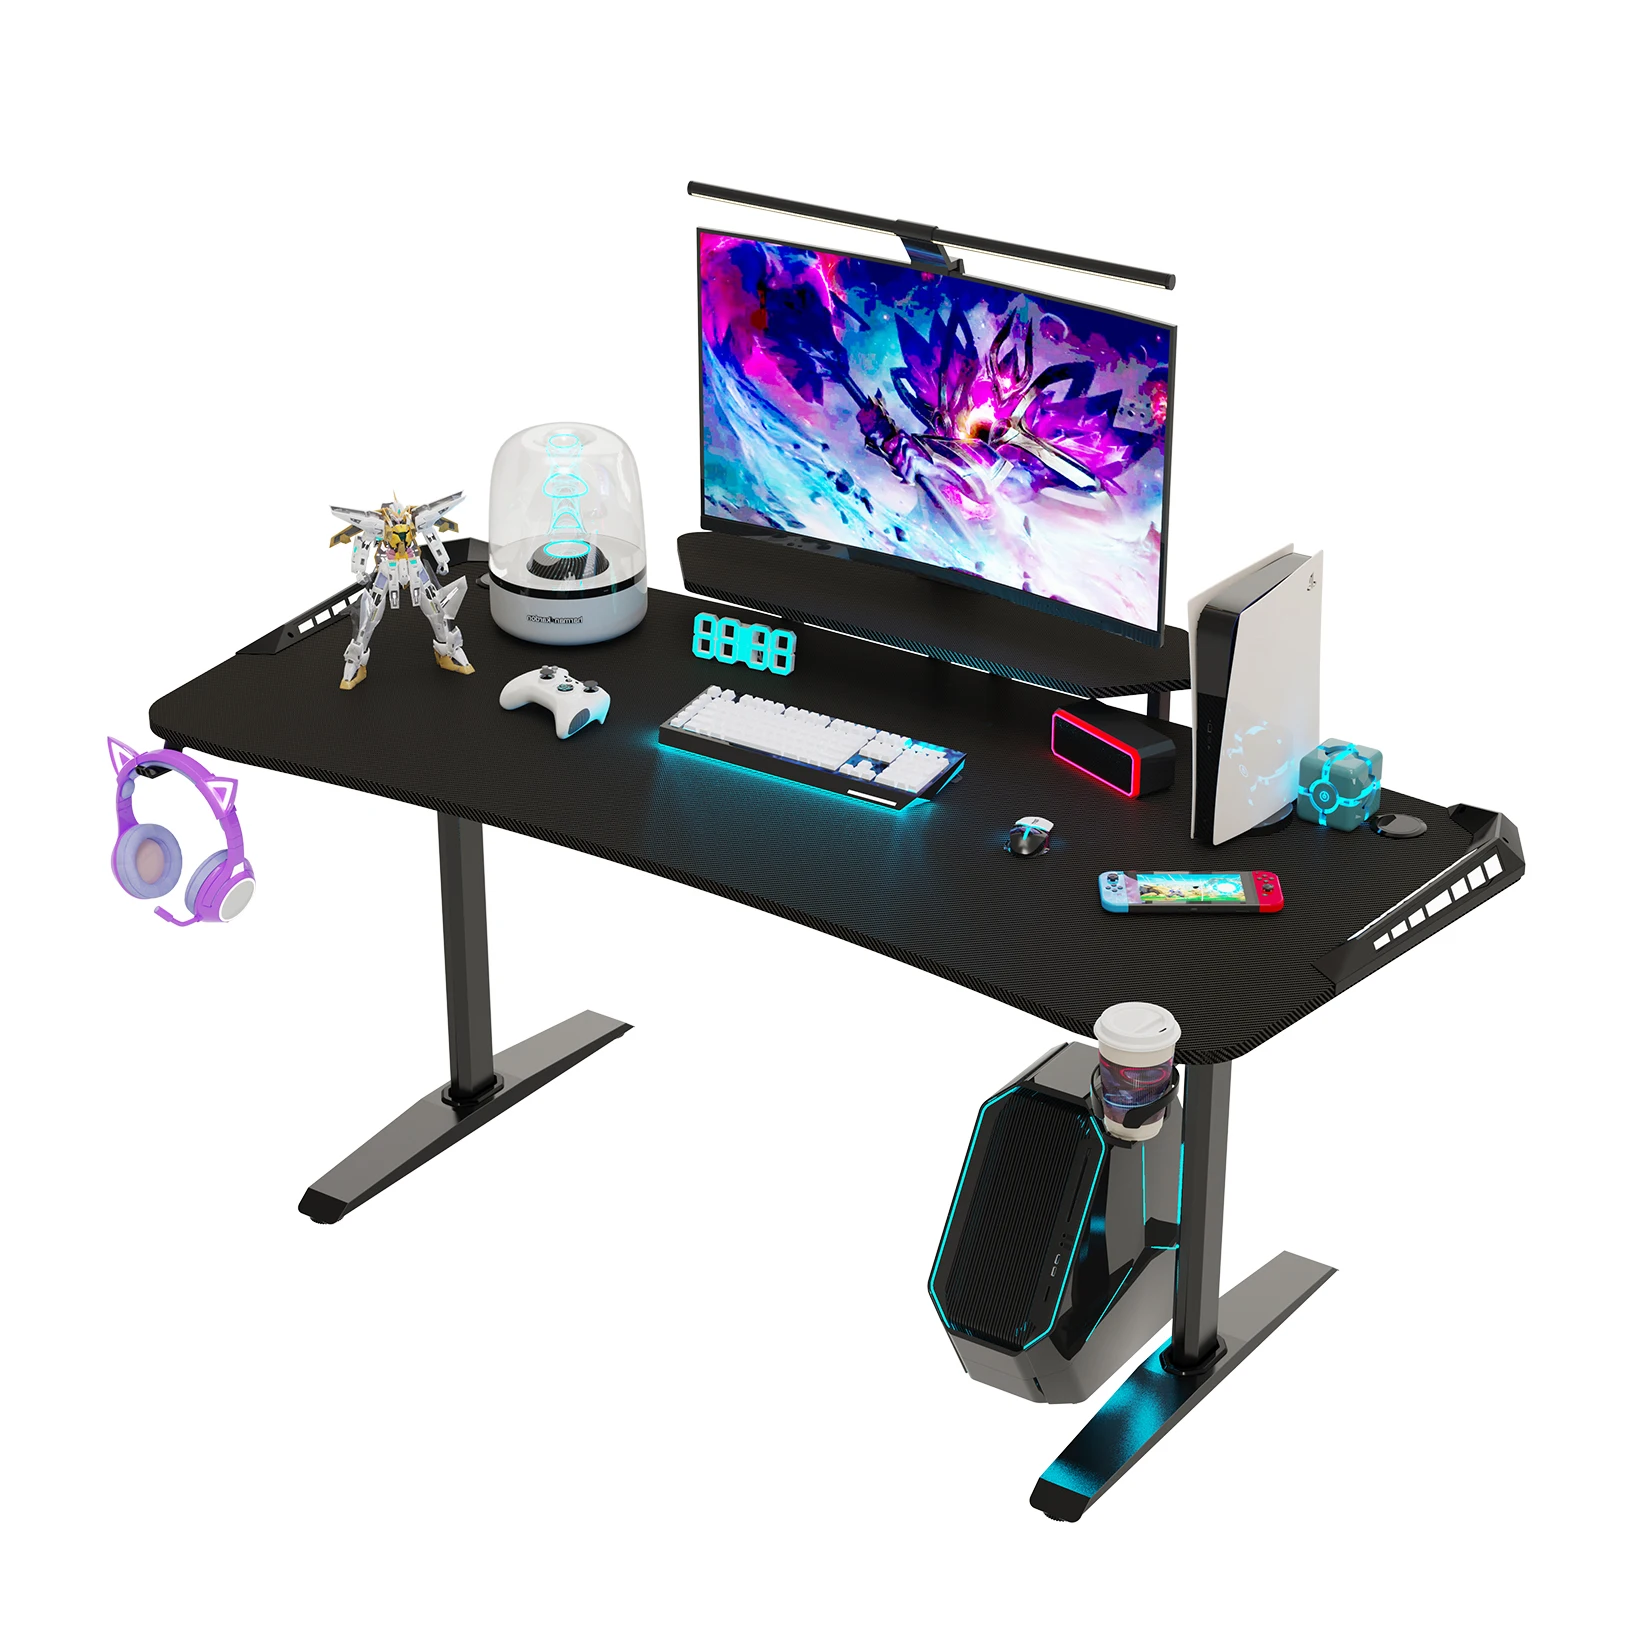 Jumbo Gaming Desk with Monitor Shelf, Large PC Computer Desk with